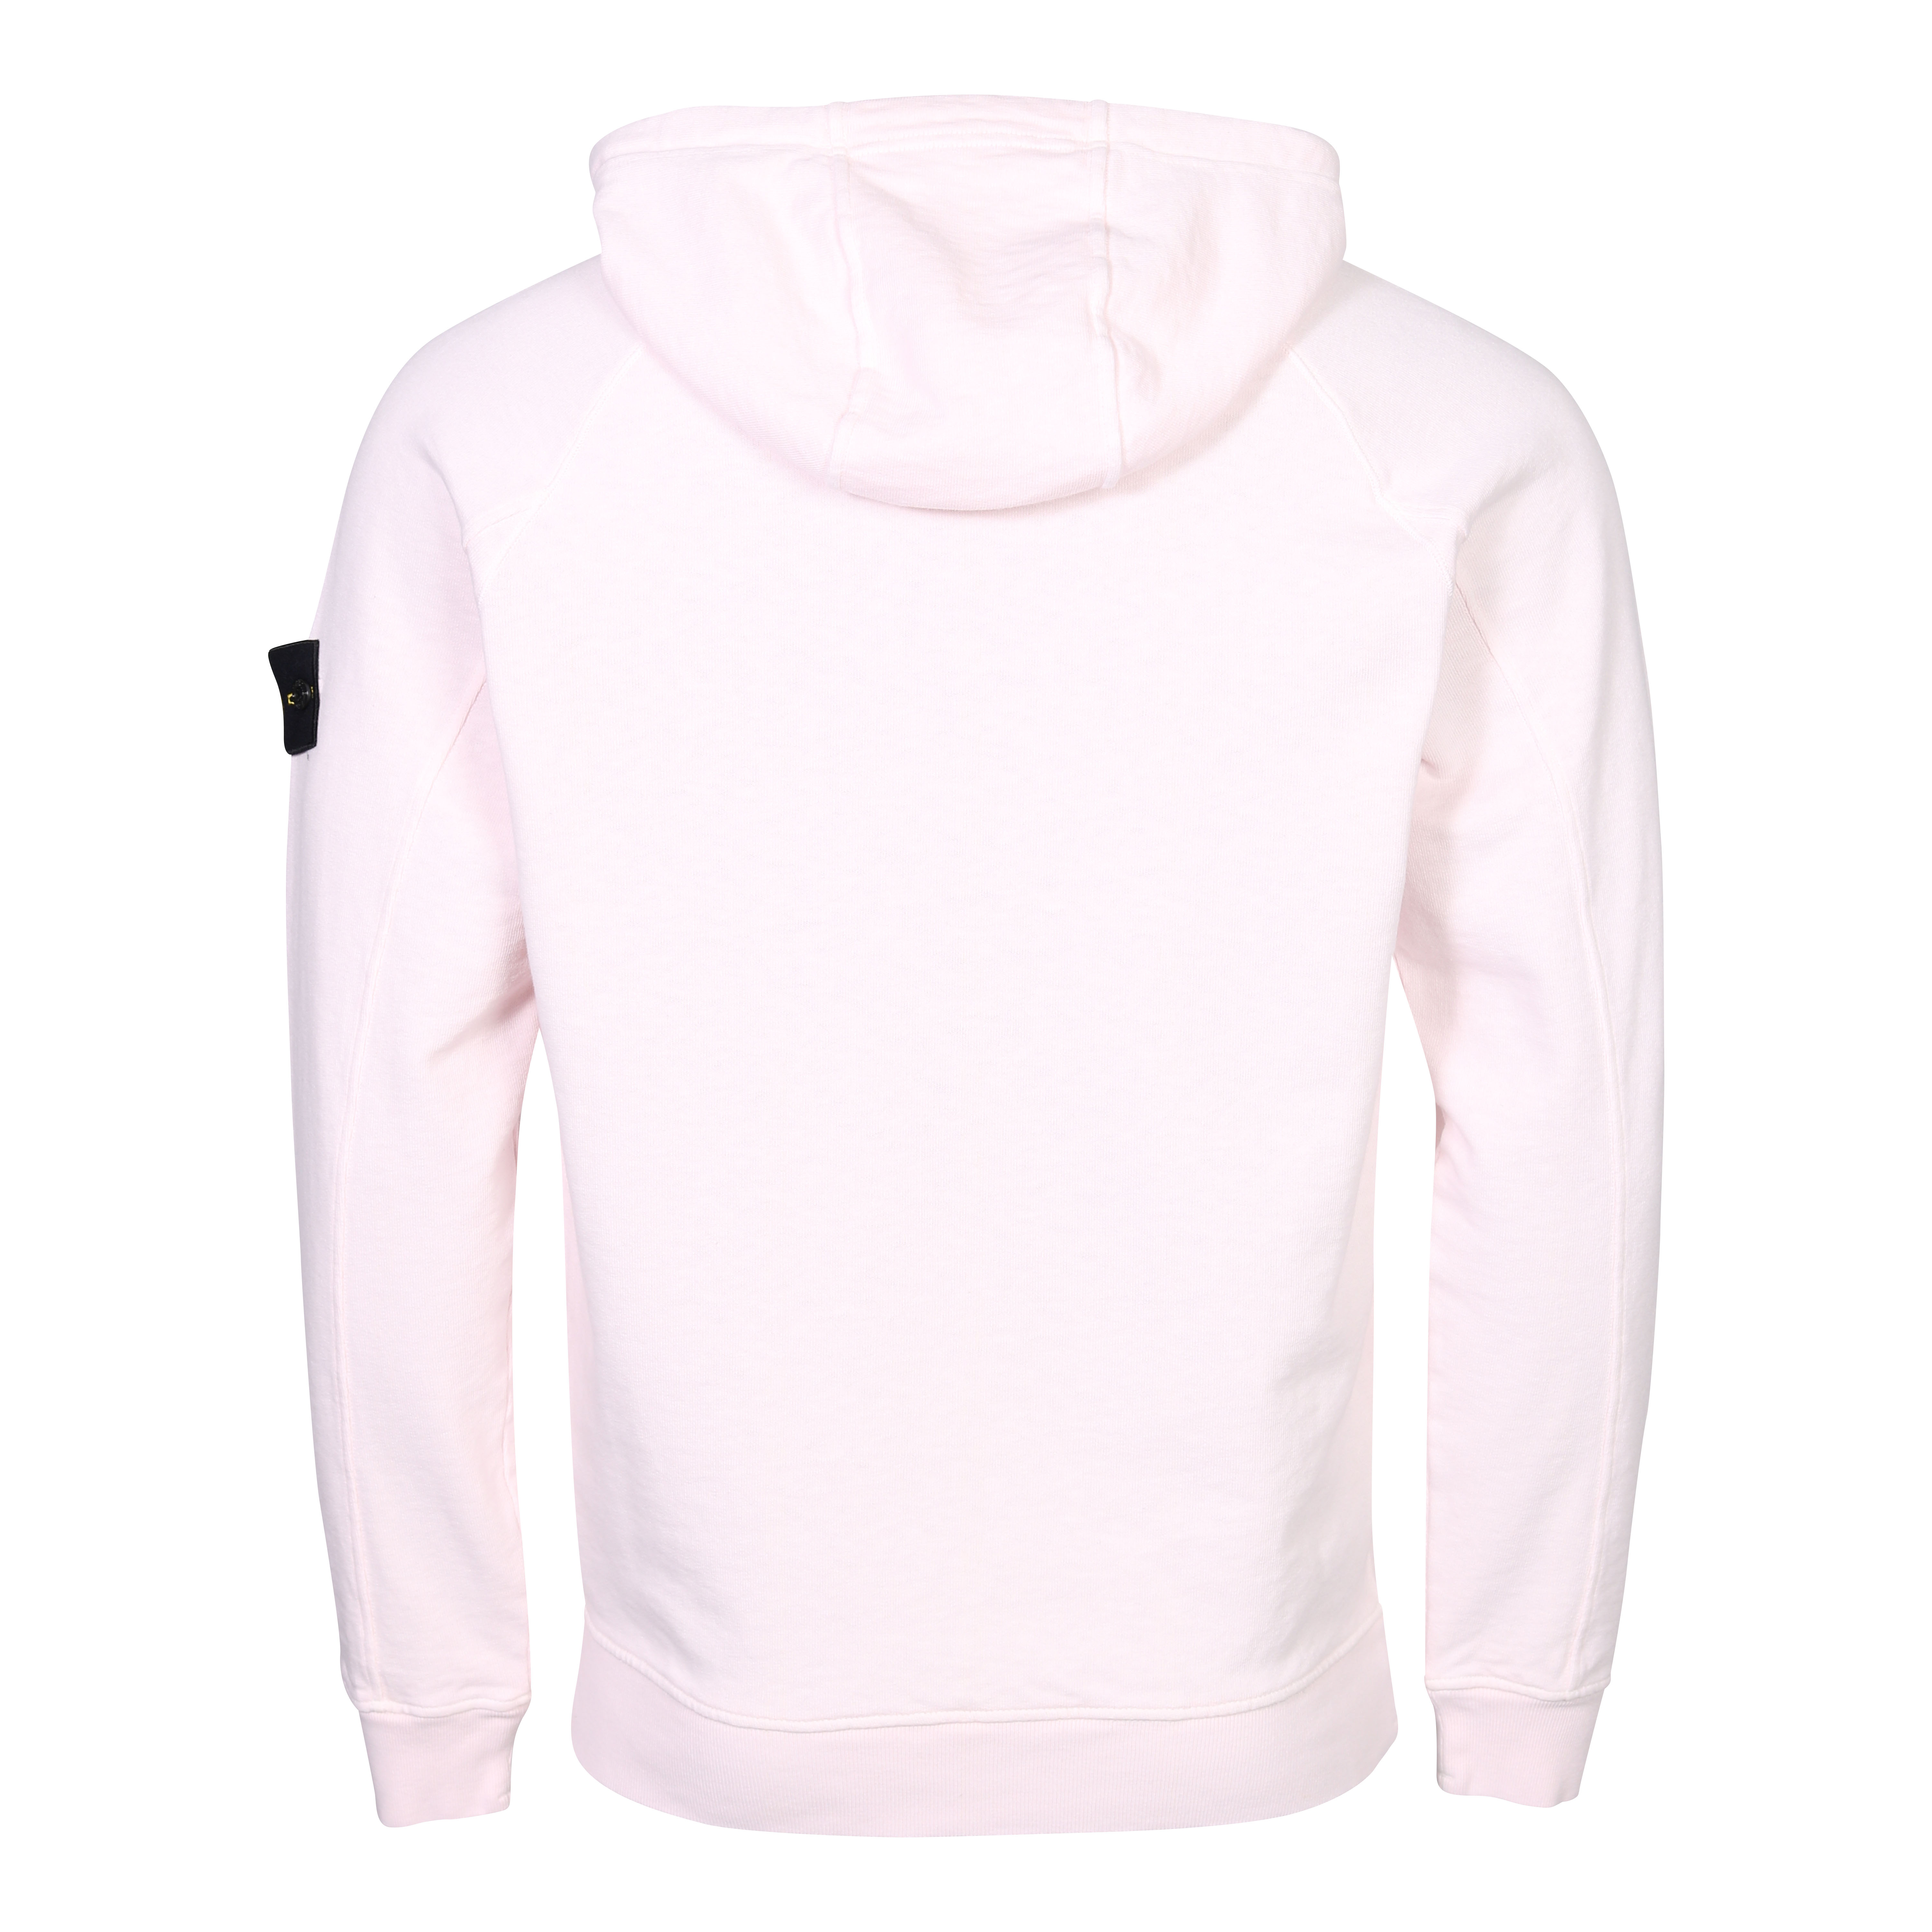 Stone Island Sweat Hoodie in Washed Light Pink 2XL